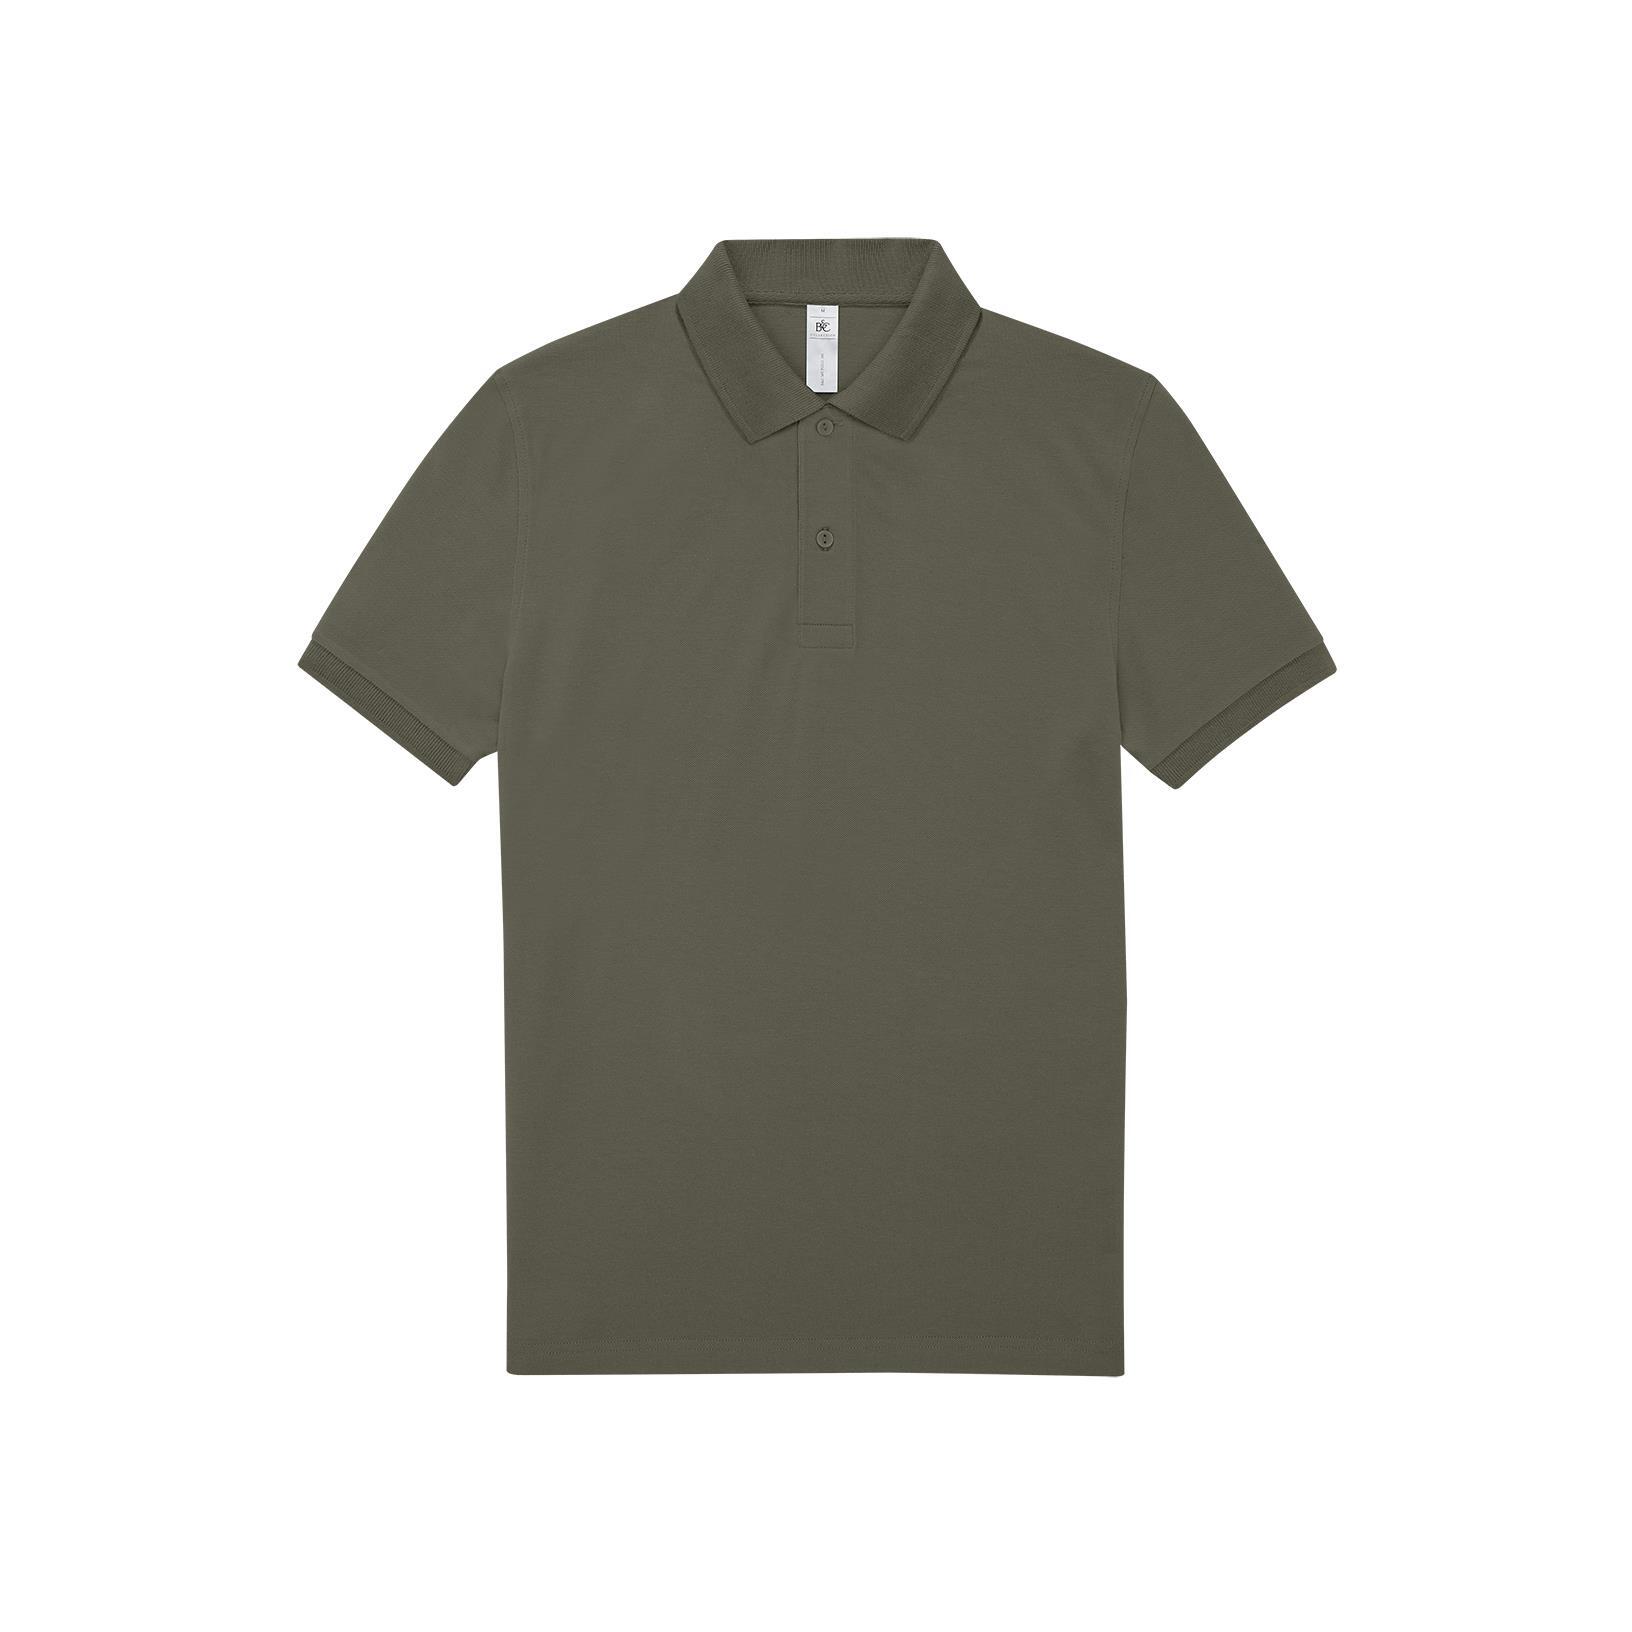 Polo voor mannen camouflage groen moderne polo